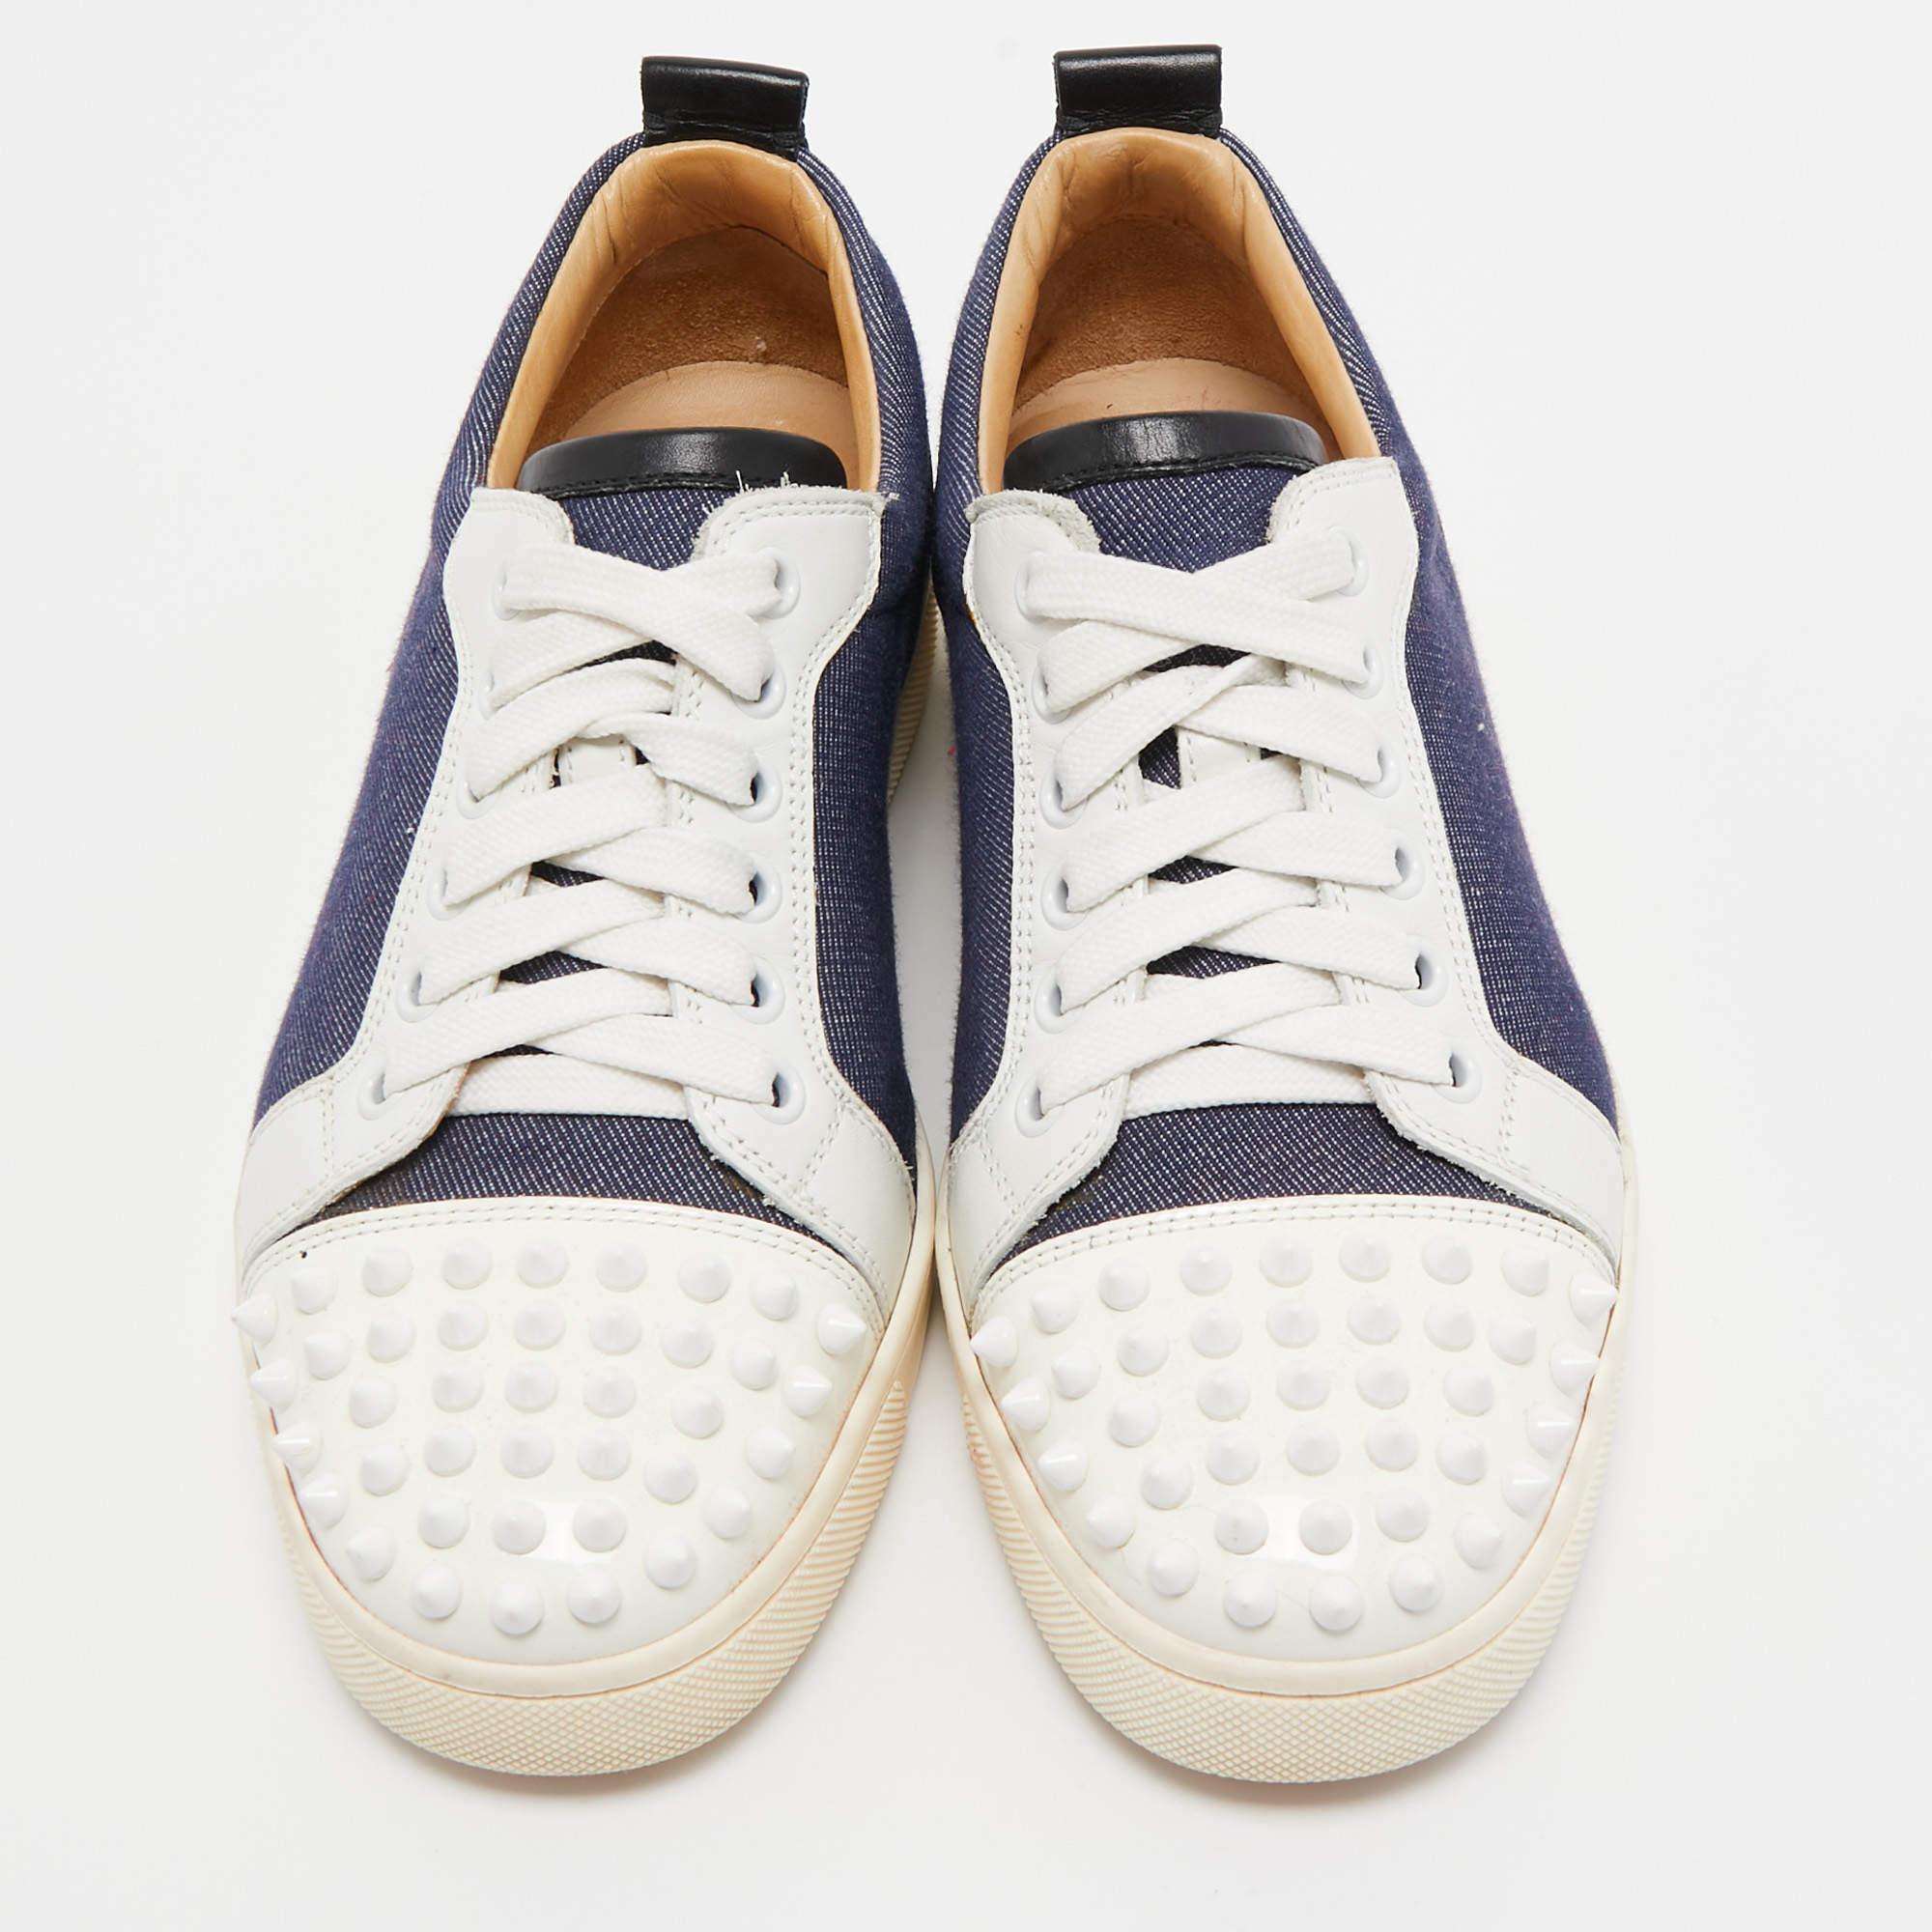 Coming in a classic silhouette, these designer sneakers are a seamless combination of luxury, comfort, and style. They are designed with signature details and comfortable insoles.

Includes: Original Dustbag